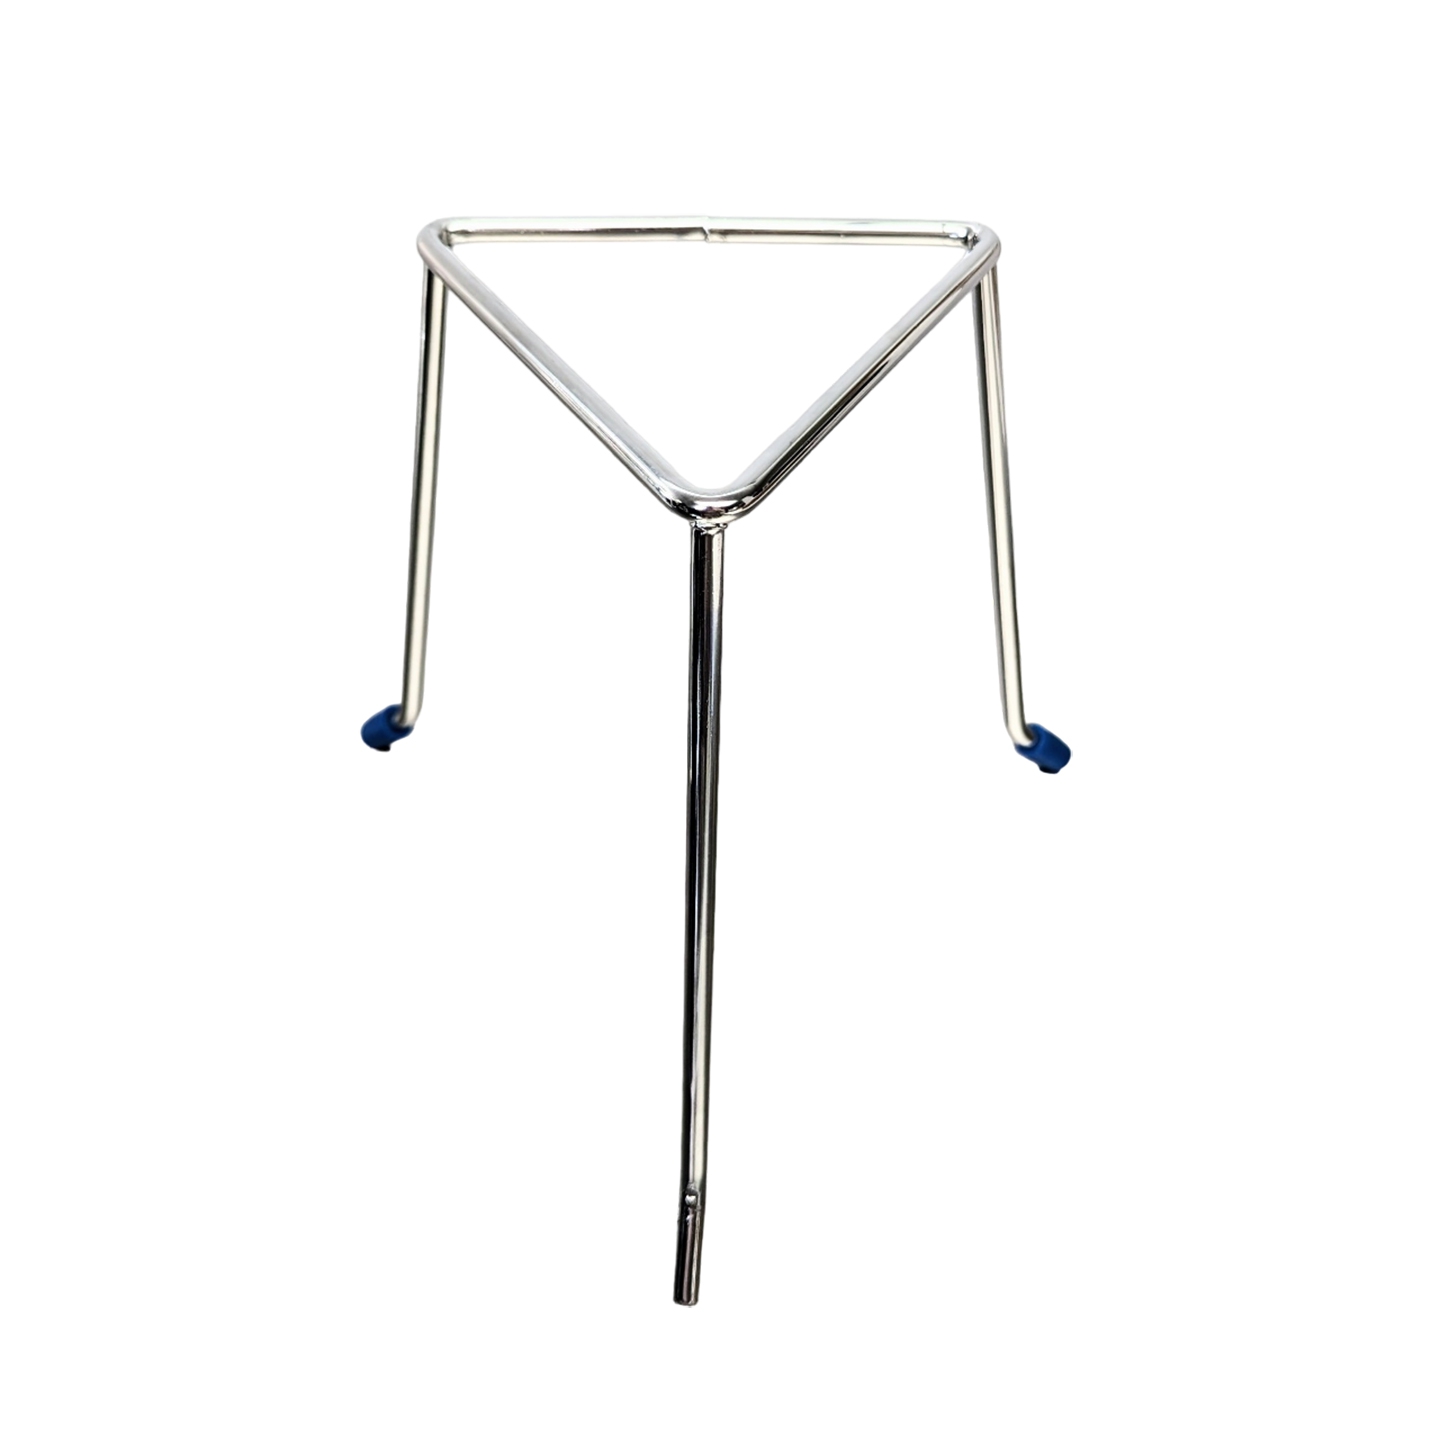 Tripod Stands, Height 190mm, Triangular Top Side Length 150mm, Stainless Steel, Rubber Feet